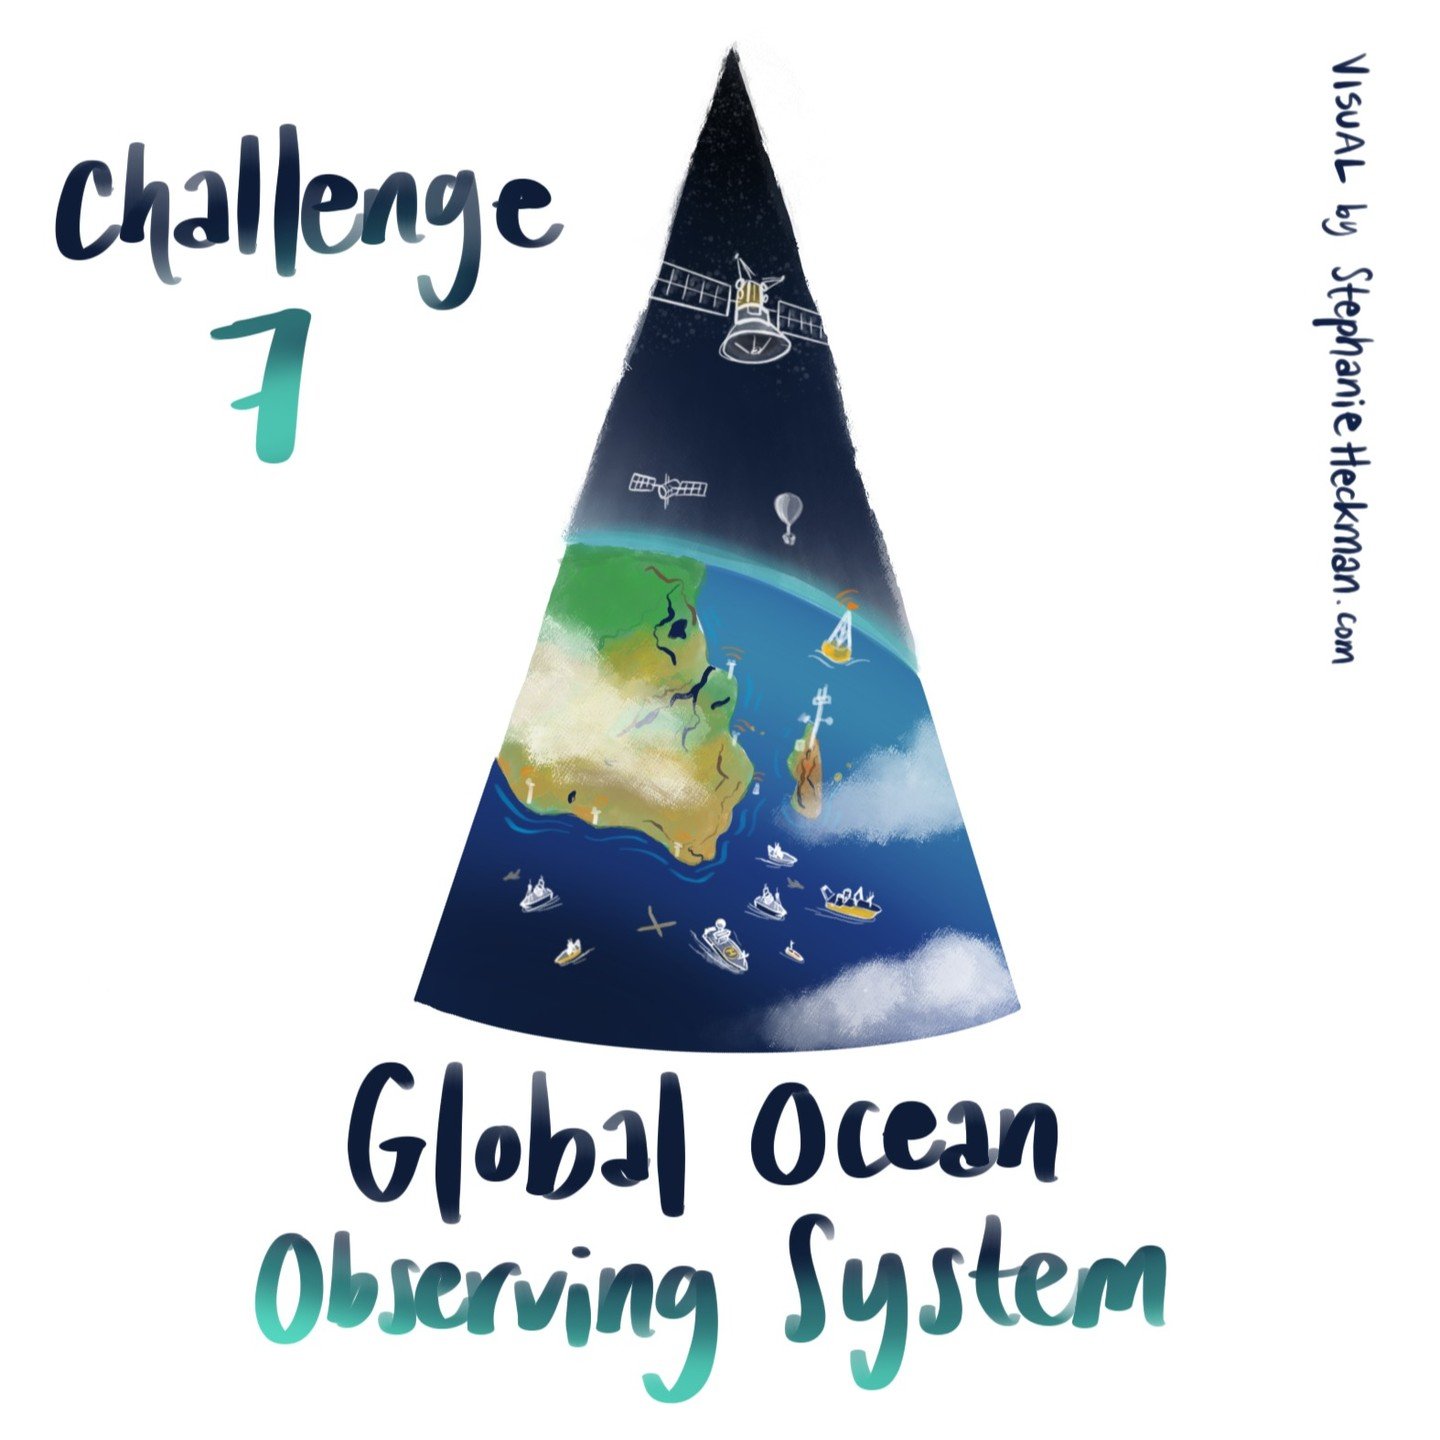 UN Ocean Decade challenge 7: Global Ocean Observing System

We know about climate change thanks to a decades long effort to gather and coordinate all climate data and research. These systemic observations underpin our ability to predict and respond. 